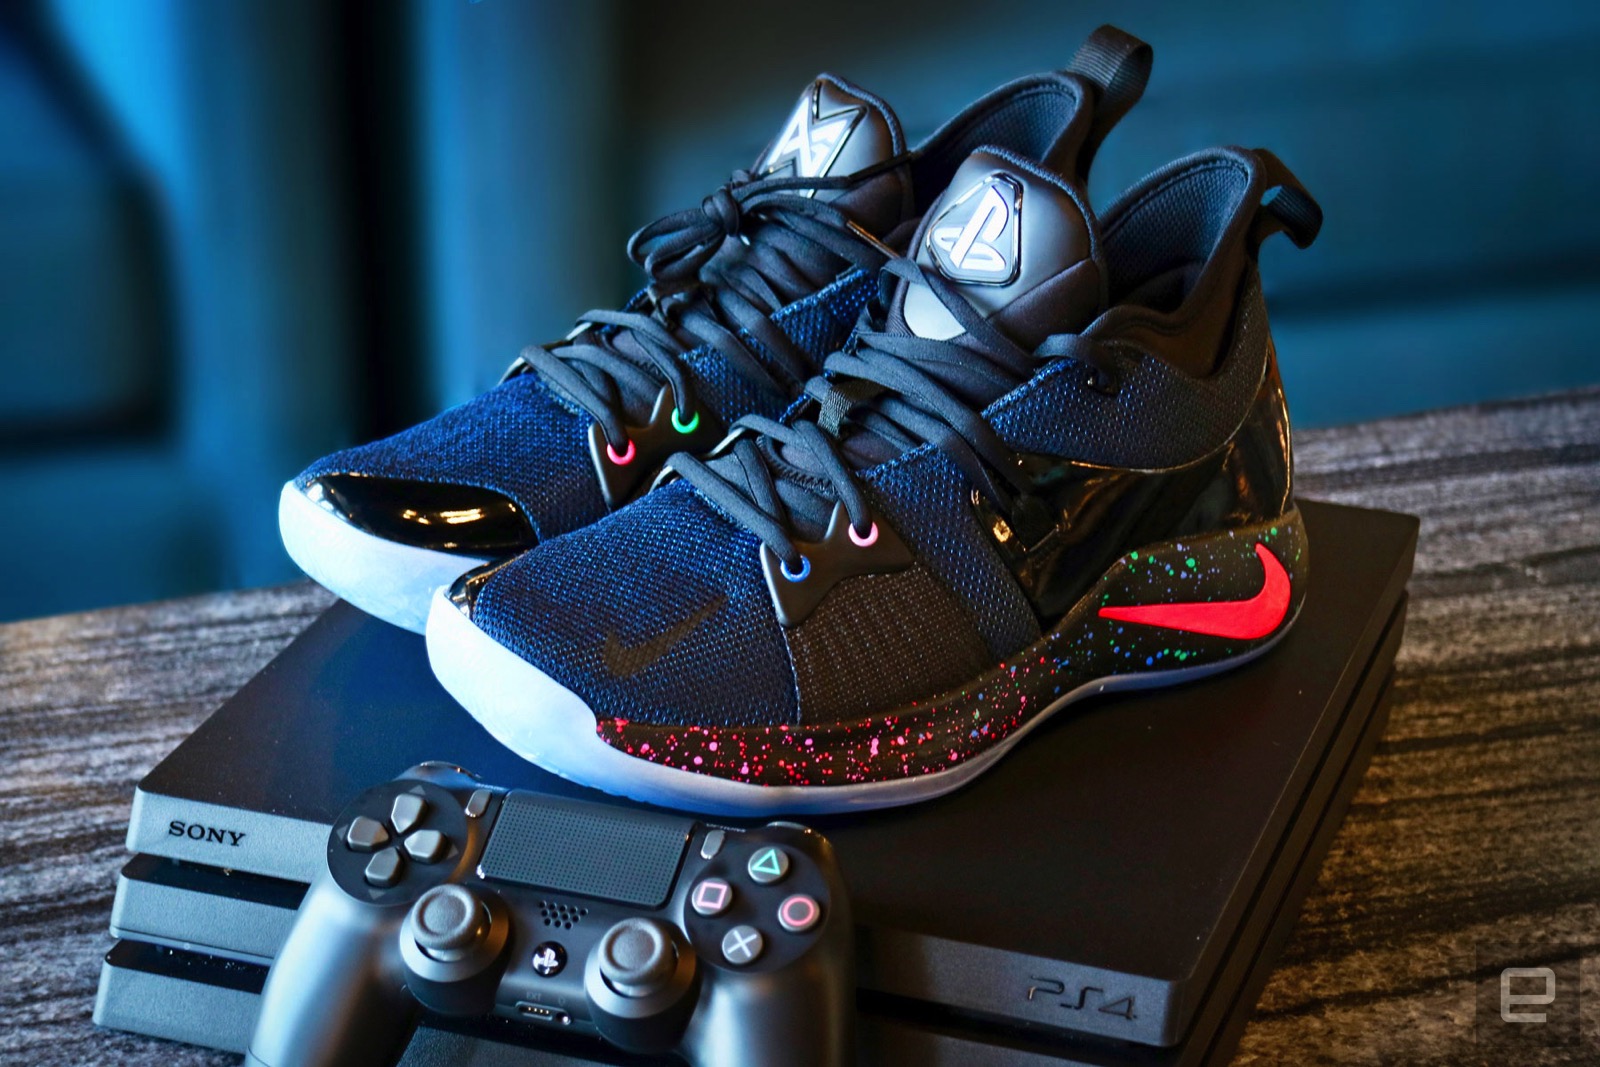 heno Observar folleto Nike's 'PlayStation' shoes make hypebeasts out of gamers | Engadget